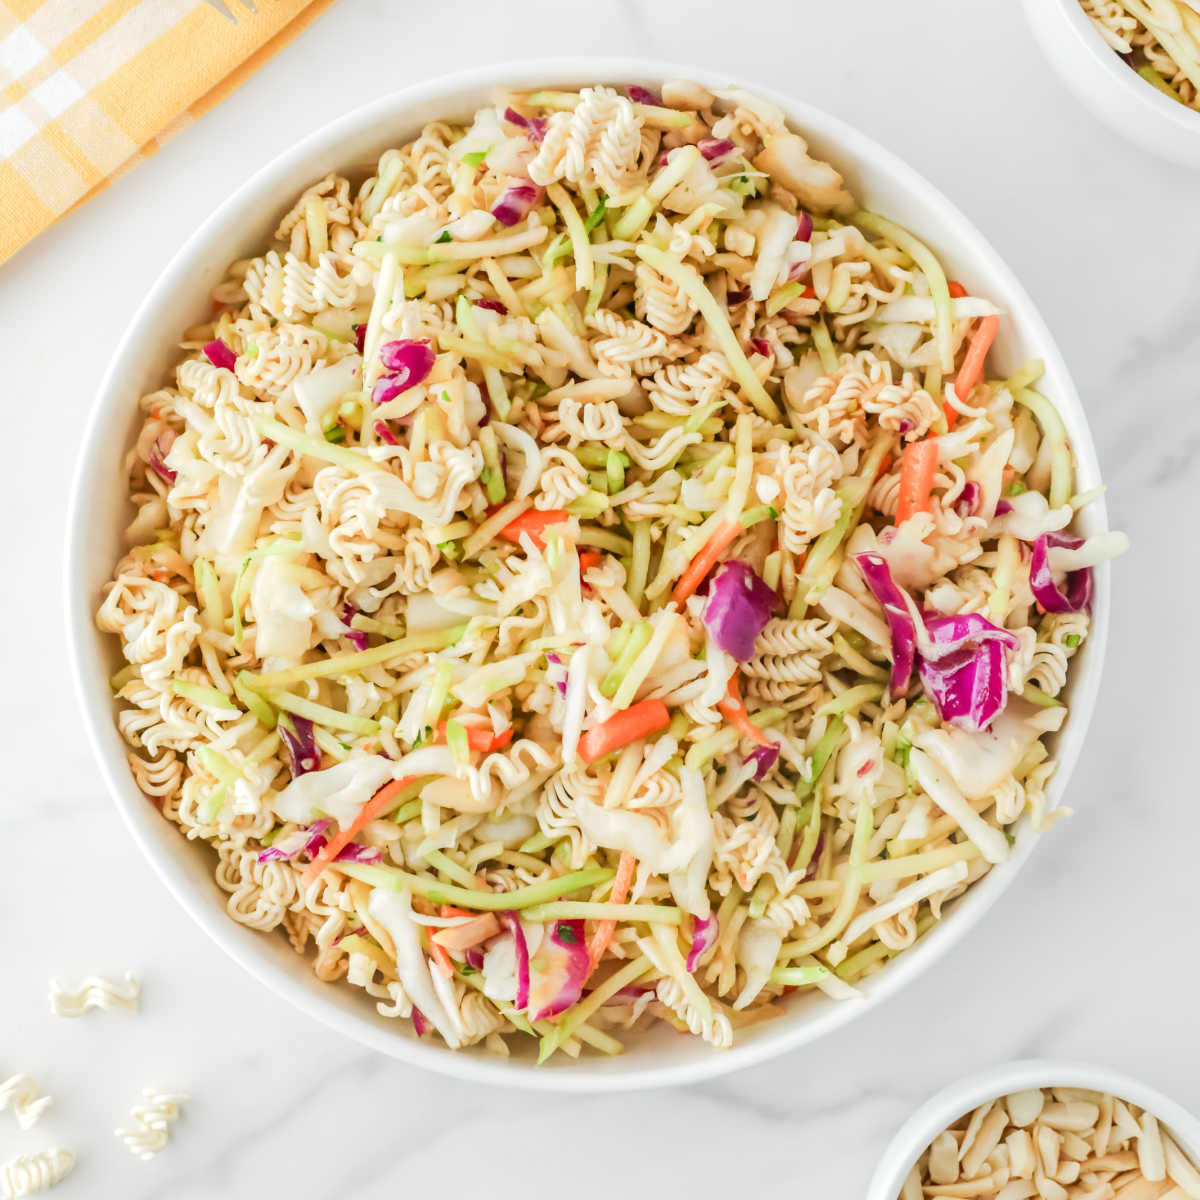 Serving bowl of ramen noodle coleslaw with cabbage, broccoli, carrots, almonds, and bits of crunchy ramen noodles all in a light soy sauce vinaigrette.